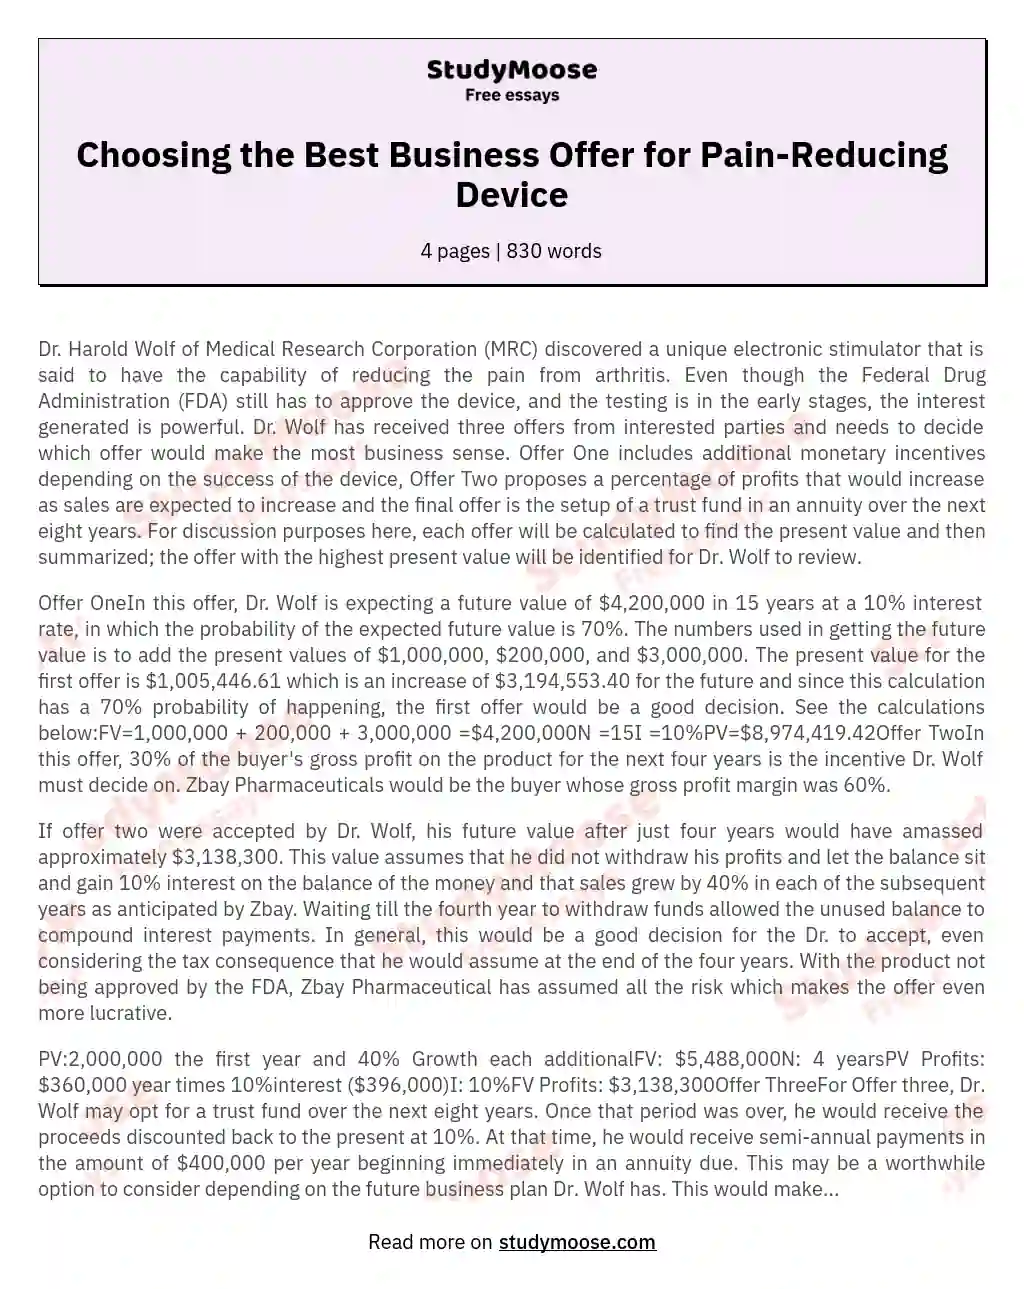 Choosing the Best Business Offer for Pain-Reducing Device essay